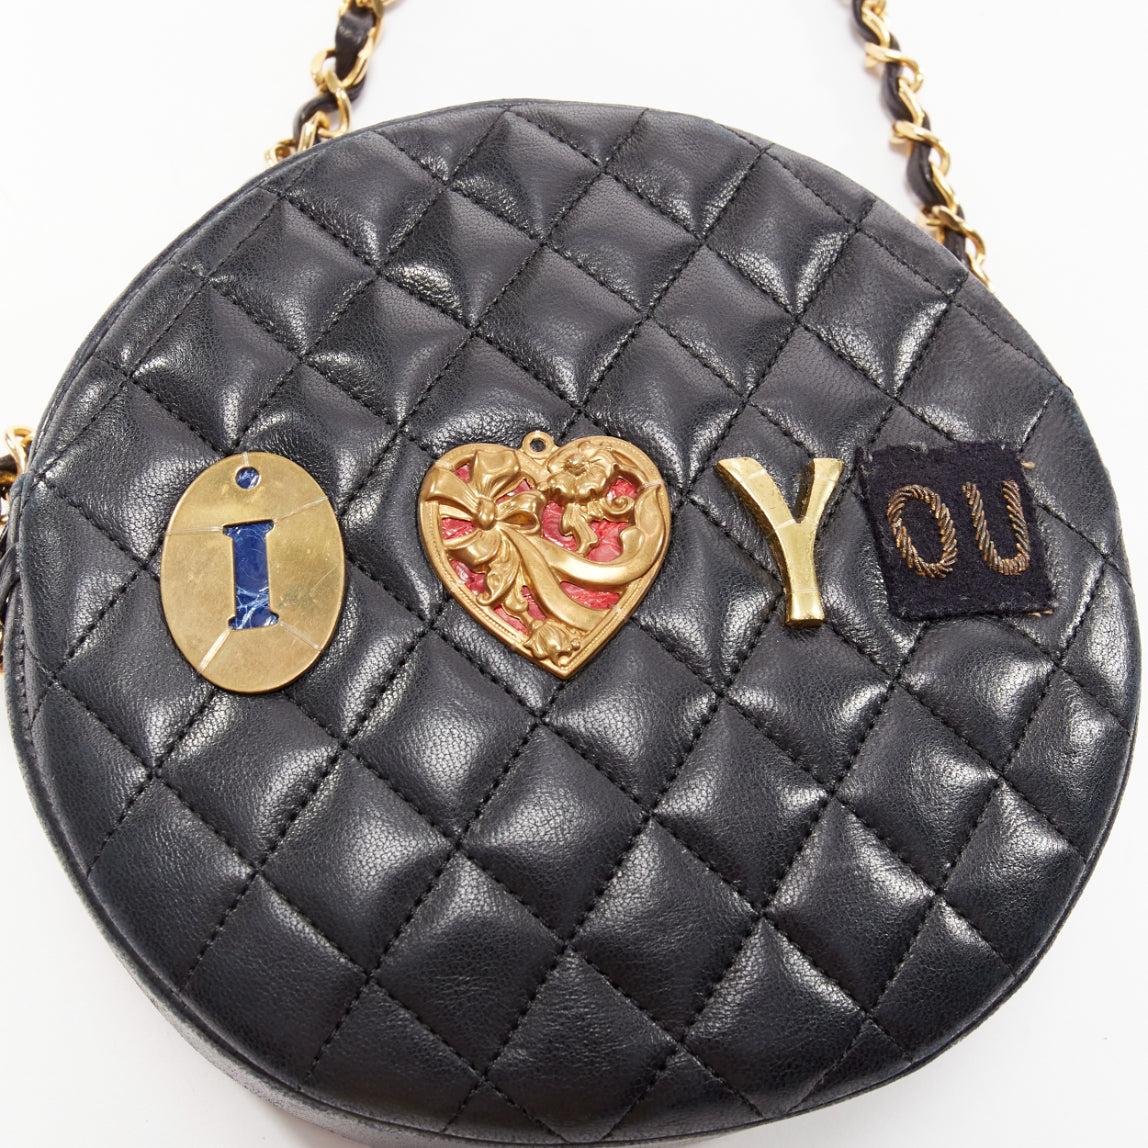 TIGER IN THE RAIN CHANEL Vintage I Love You applique round crossbody chain bag For Sale 4